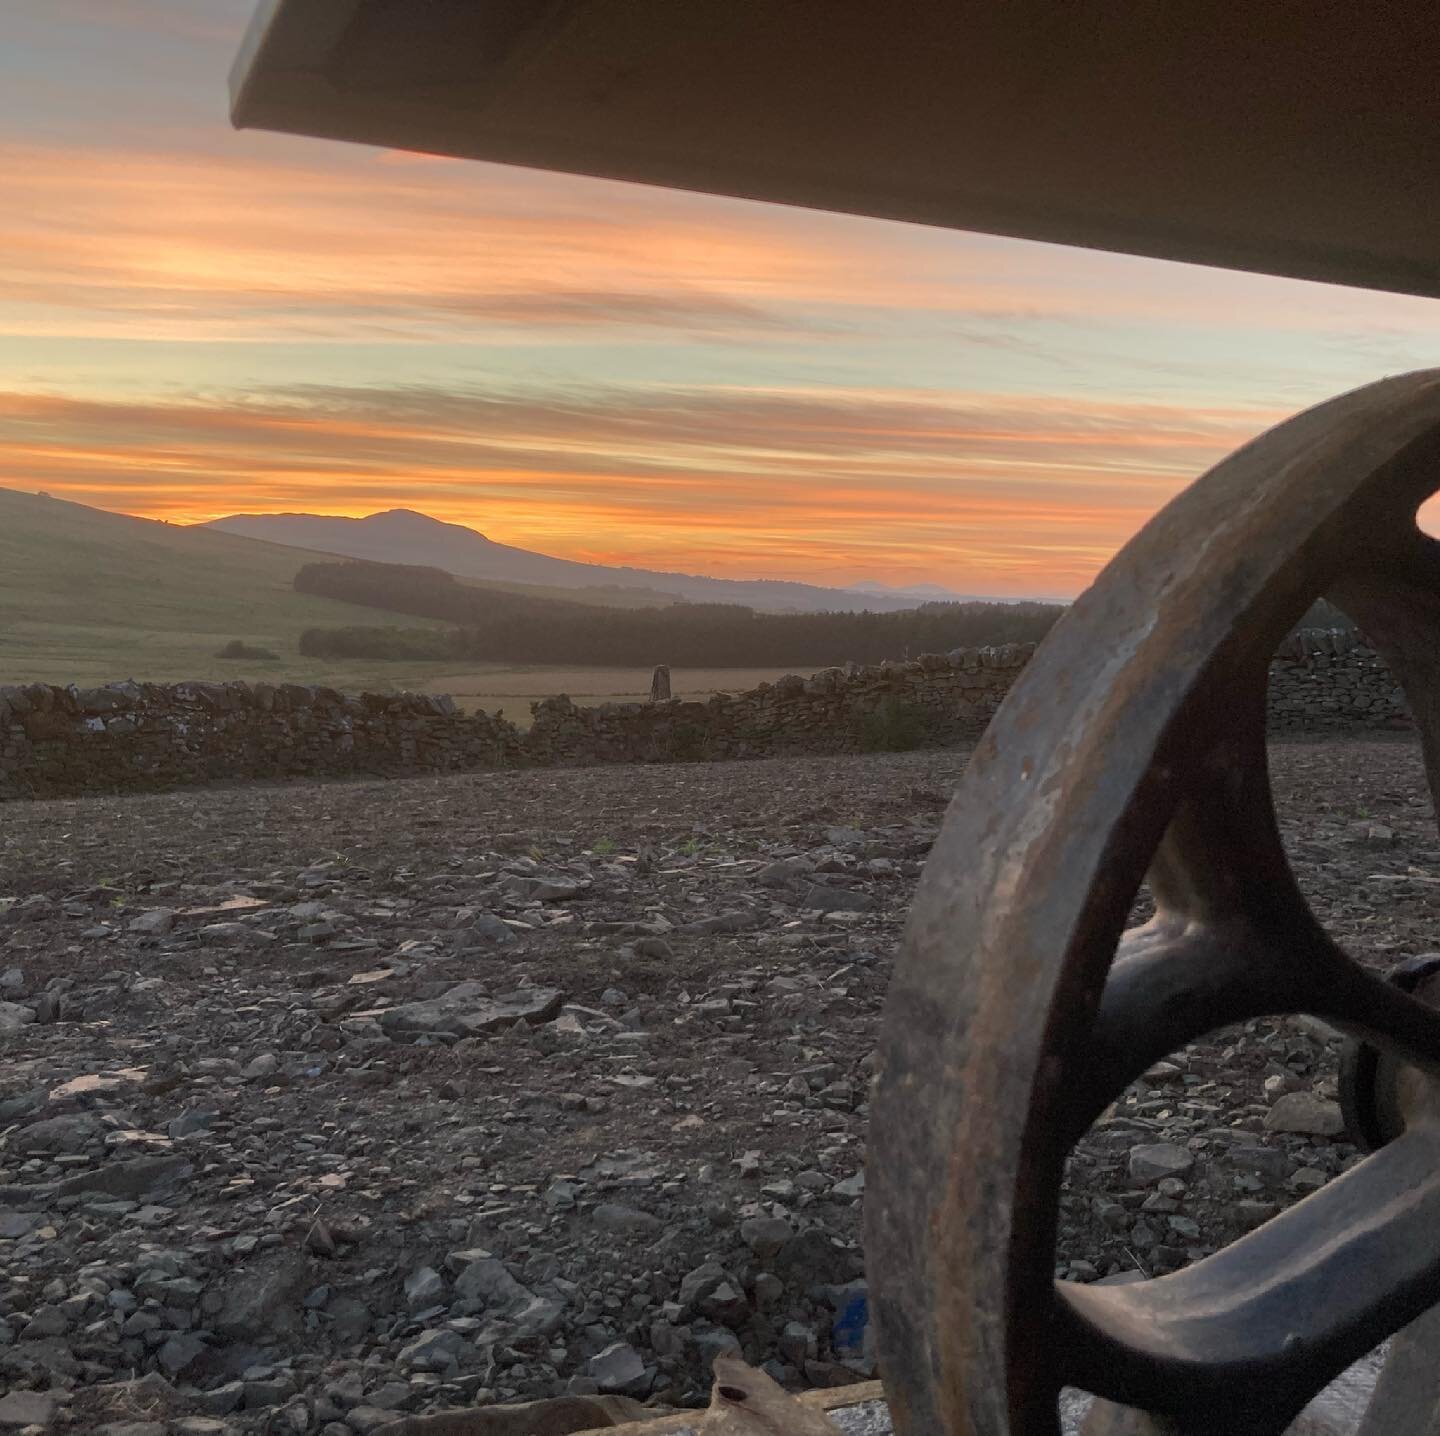 Dreamy sunset from the shepherds hut tonight&hellip; grass is peaking through after the weekends rain too. Not long now 🤞🏻